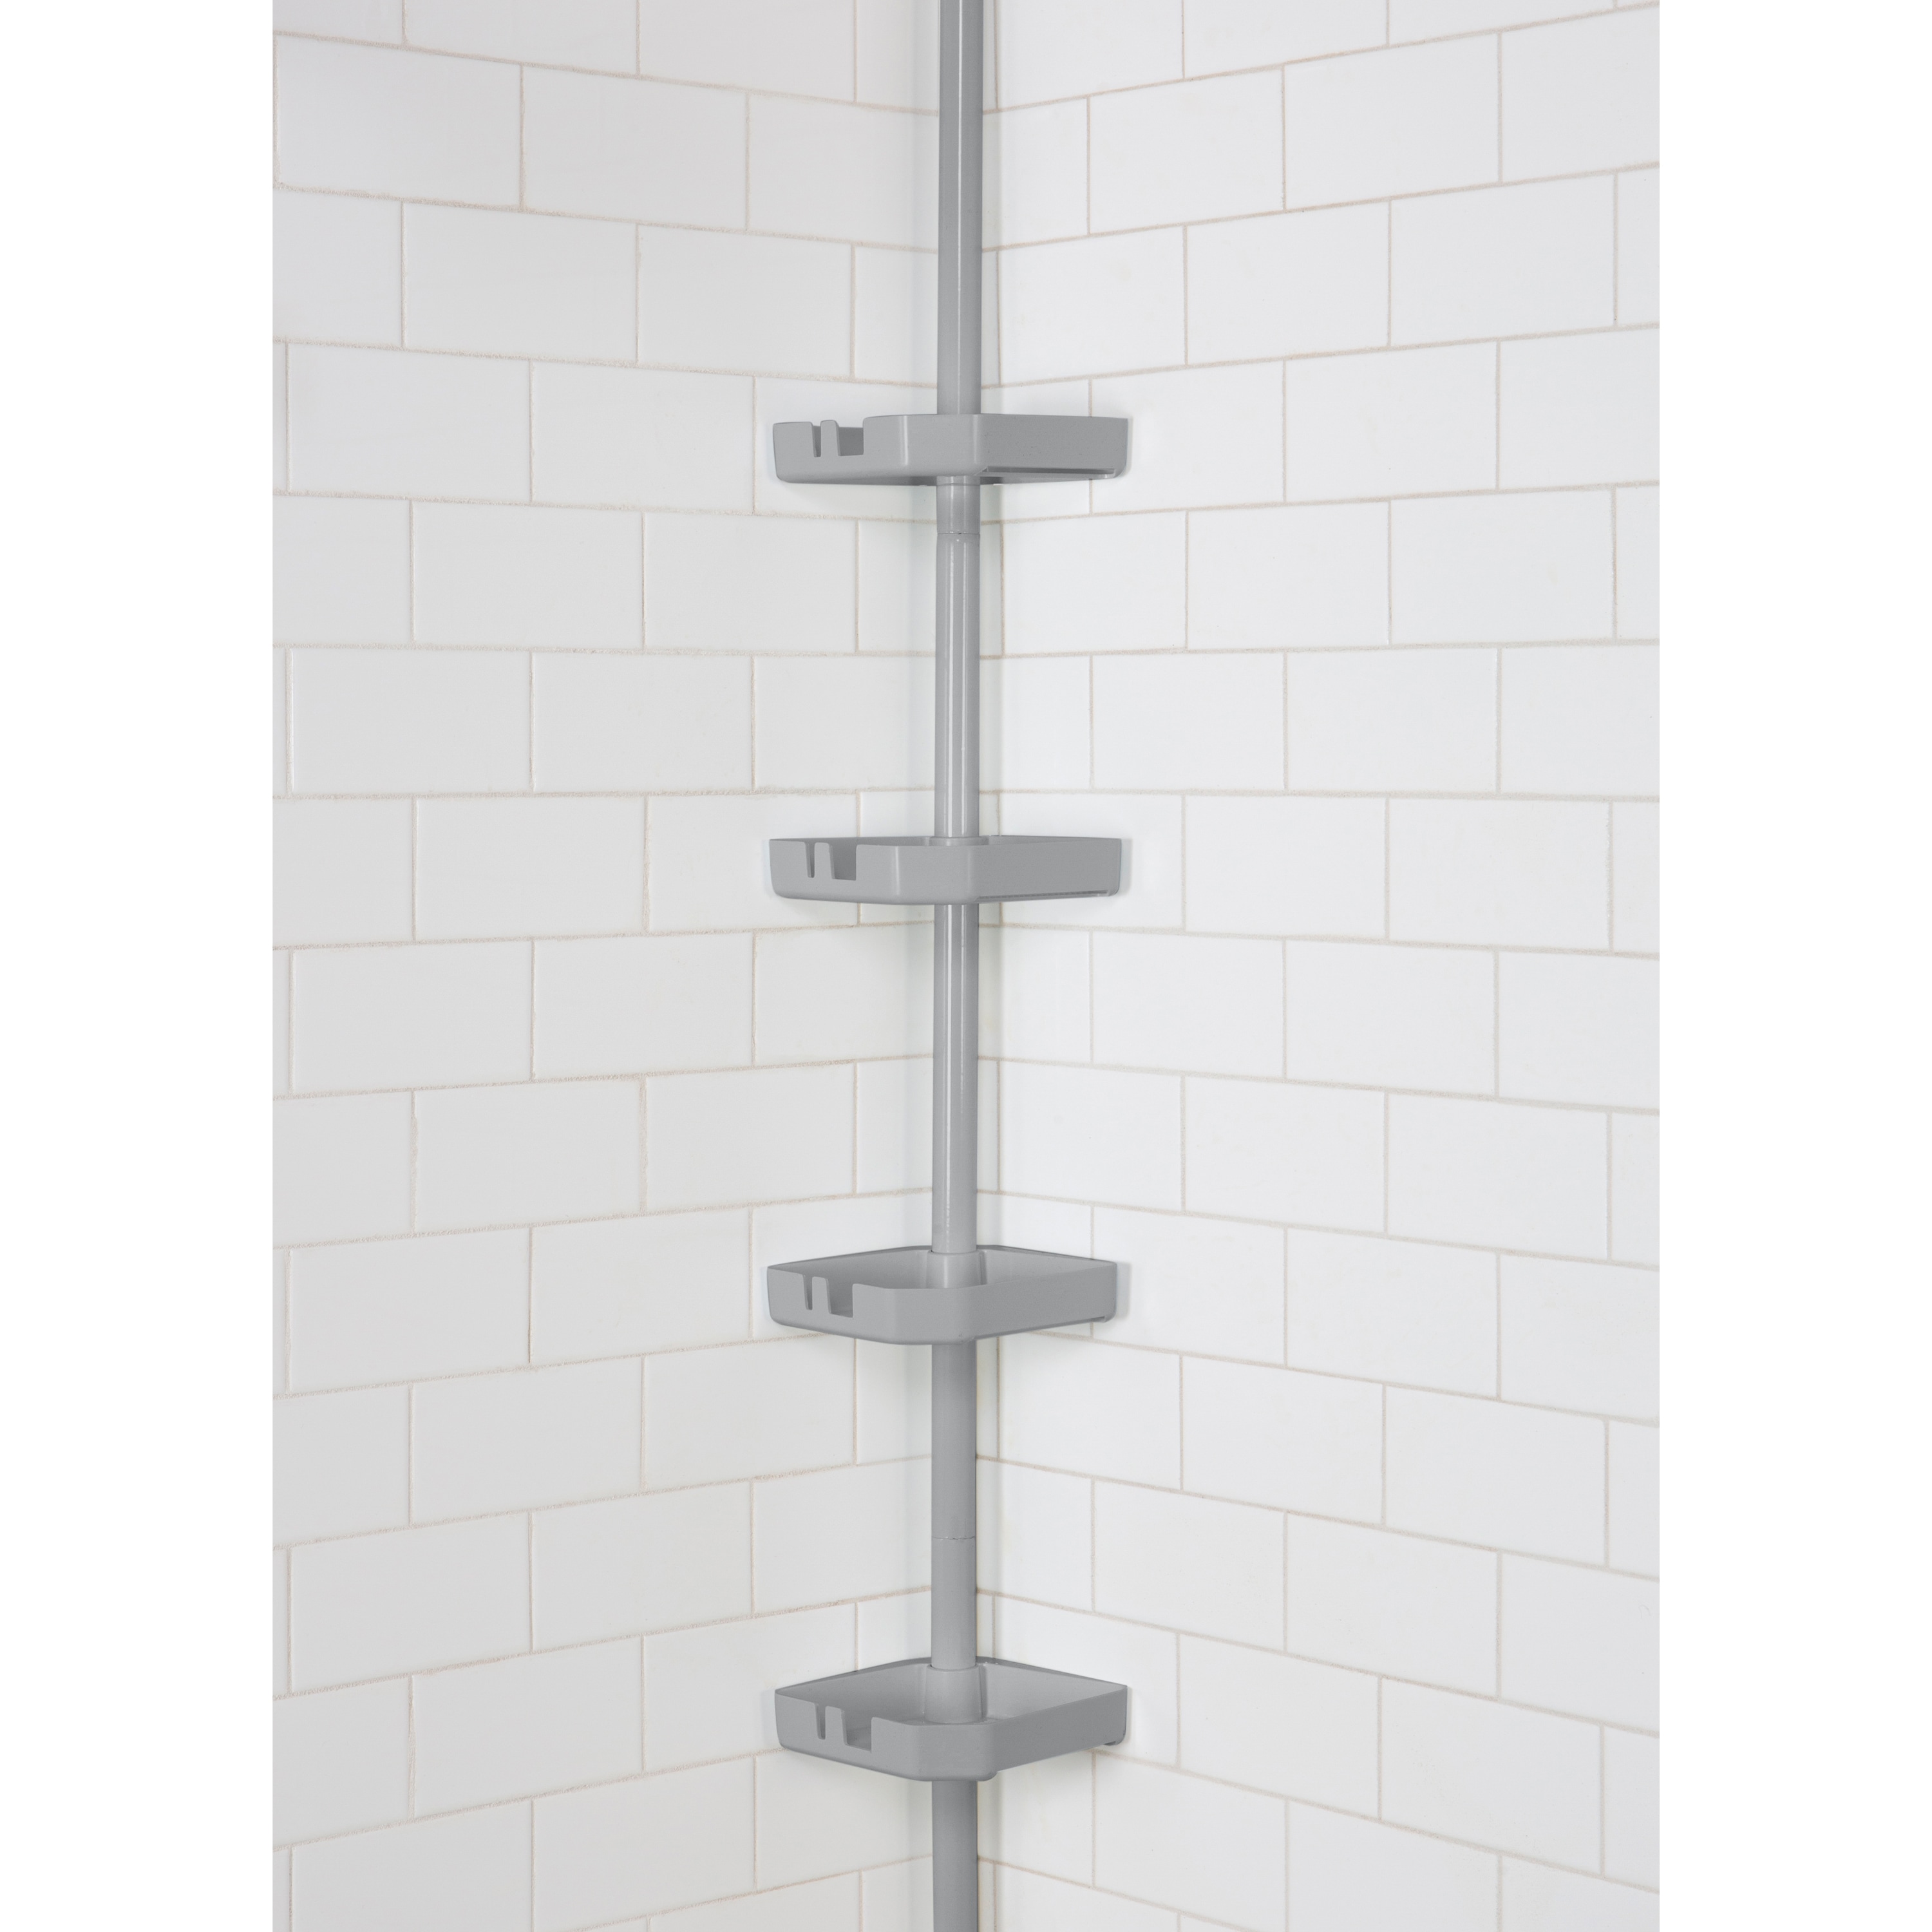 Freestanding Shower Caddies At Com, Columbia Shelving And Mirror Reviews